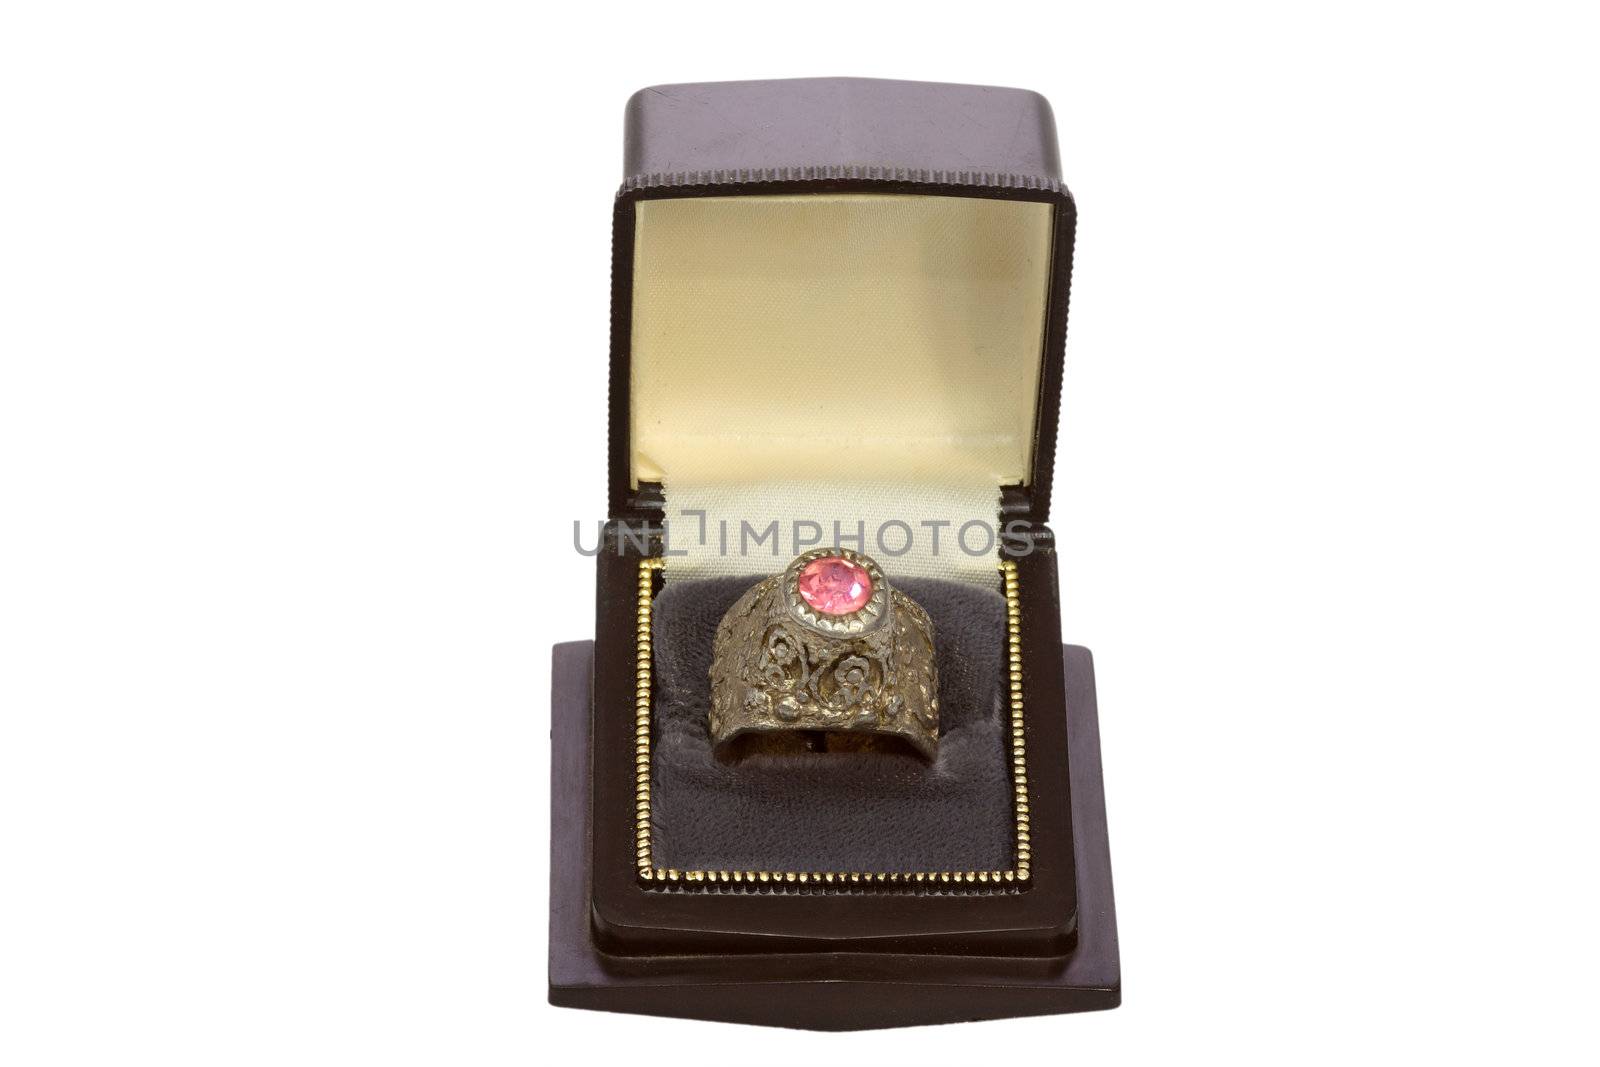 Ring in a Jewellery Case on bright background